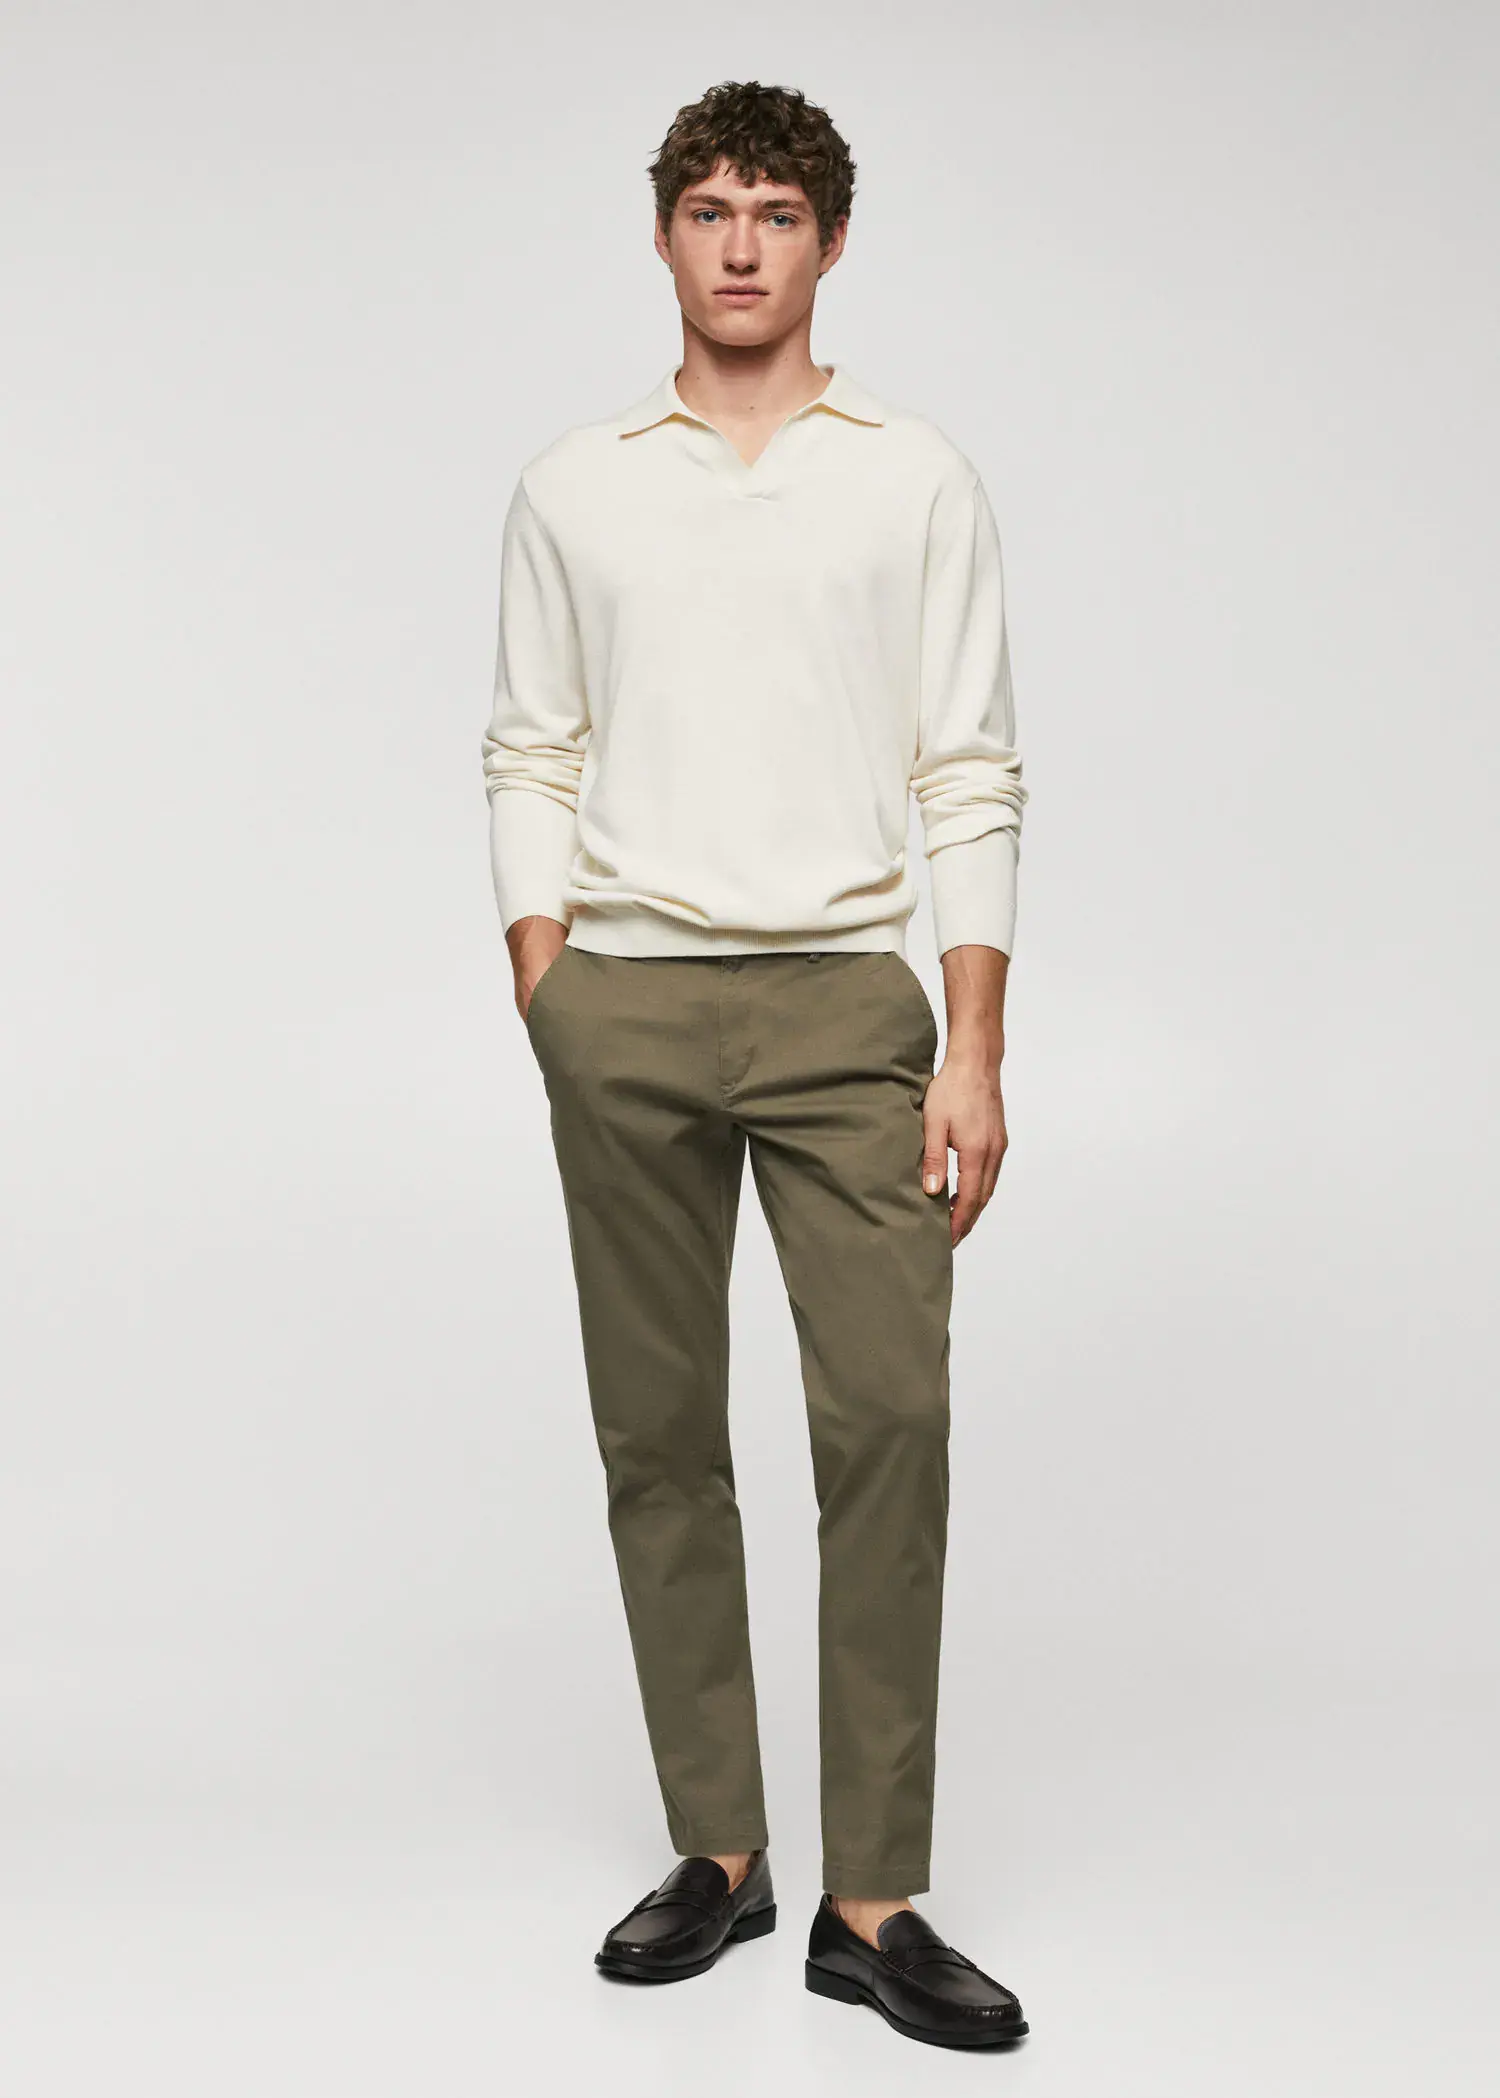 Mango Cotton tapered crop pants. a man in a white shirt and green pants. 